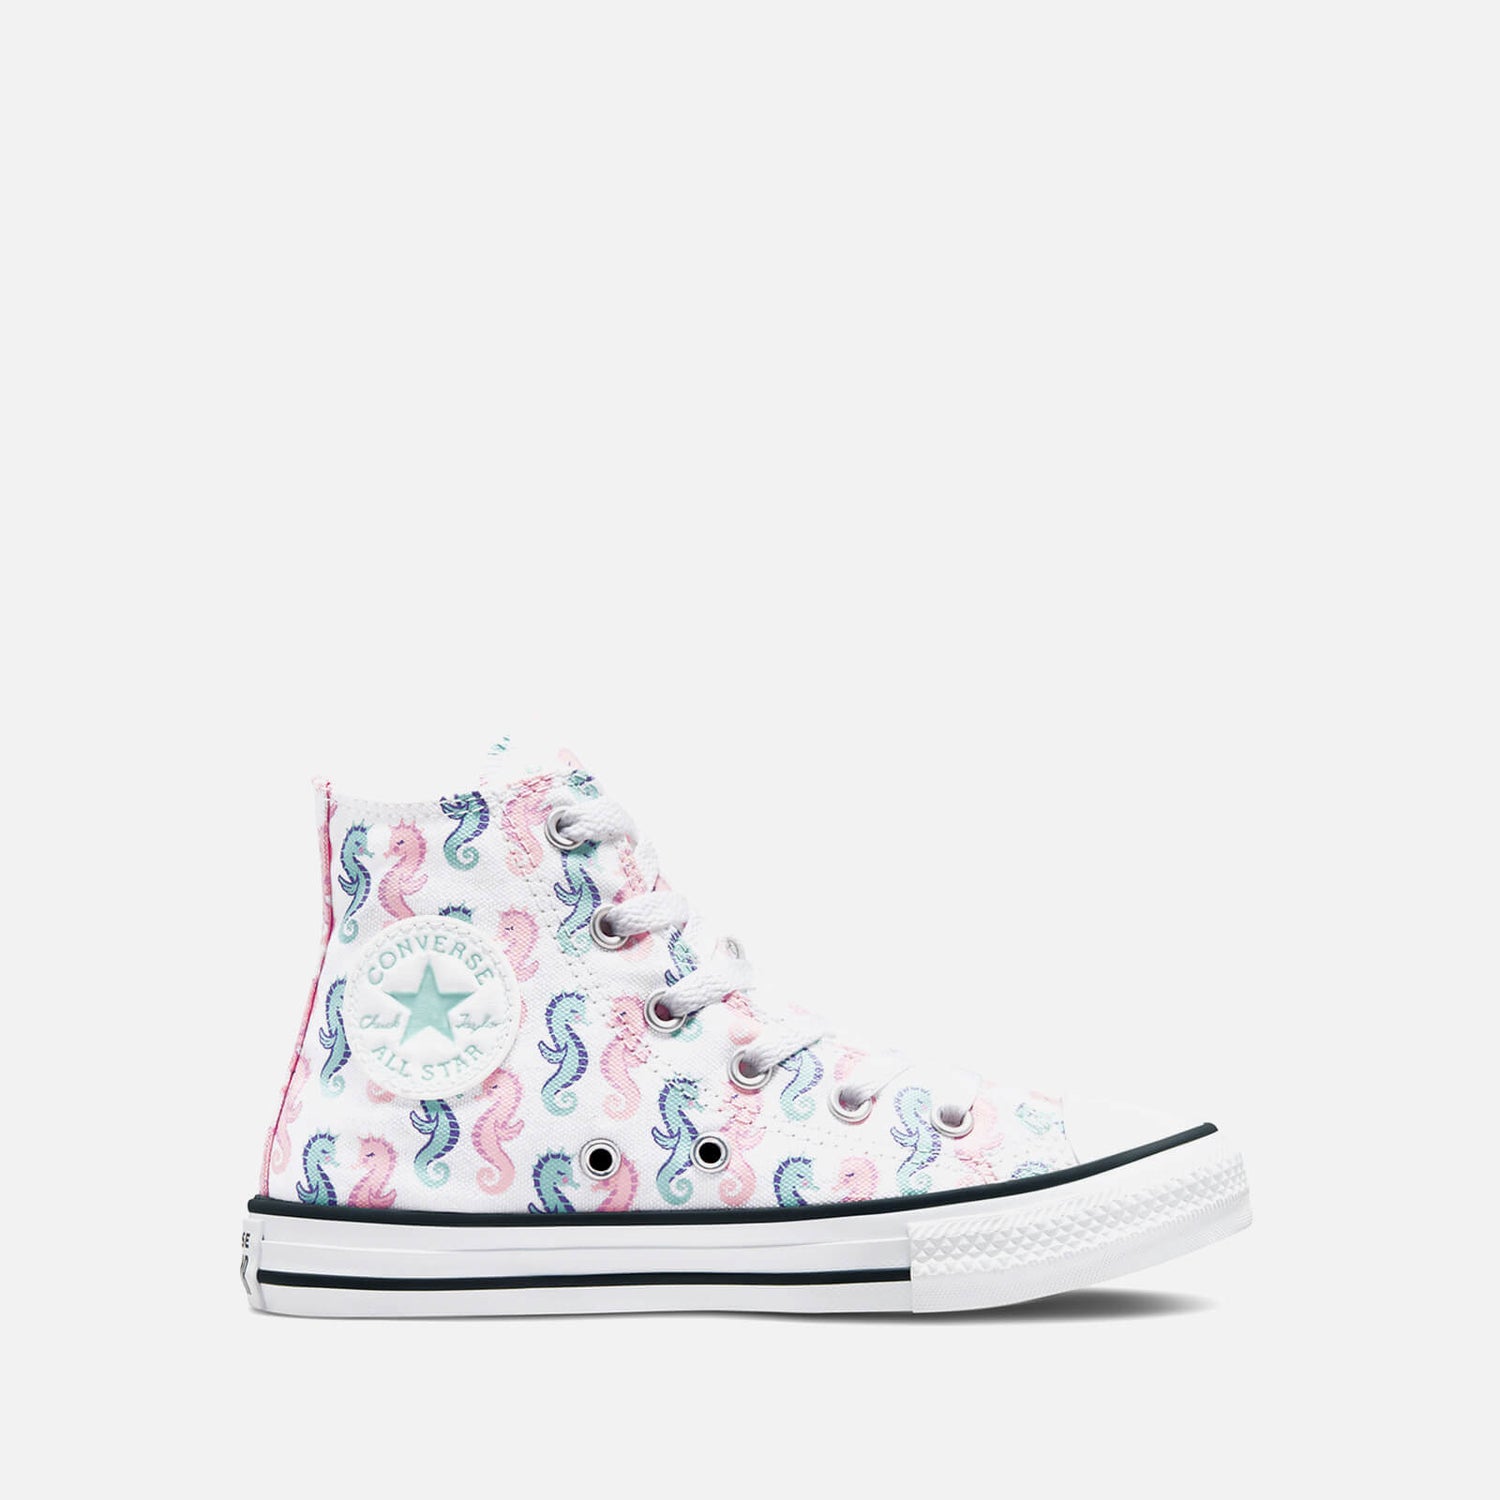 Converse Kids' Chuck Taylor All Star Seahorse Trainers - White/Storm Pink/Light Dew